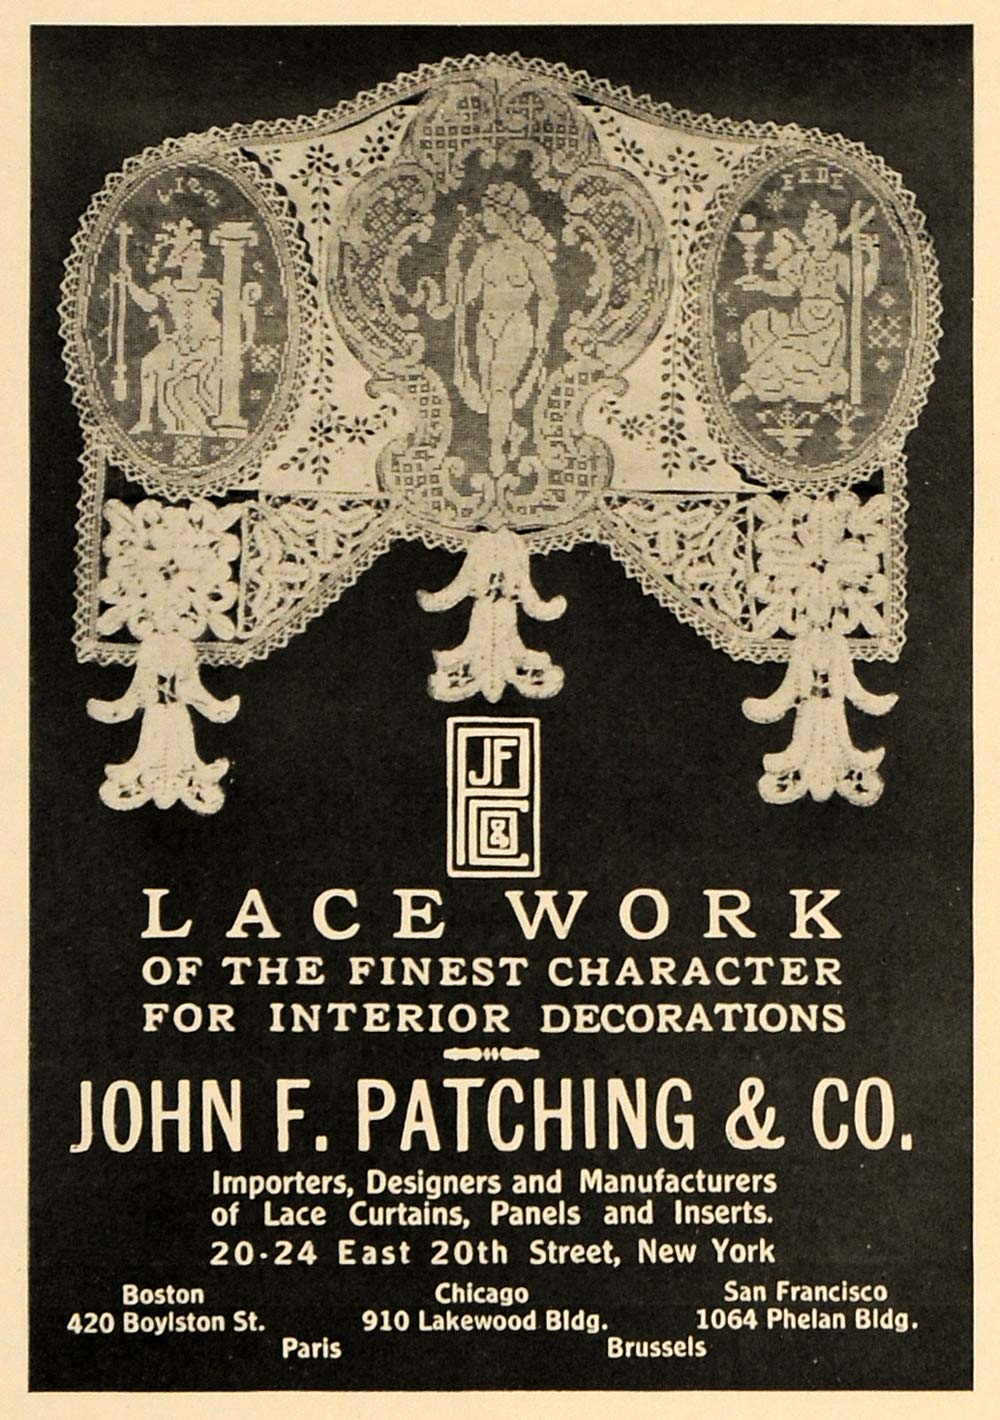 1918 Ad John F Patching Co. Lace Work Home Decoration - ORIGINAL ADVERTISING GF2